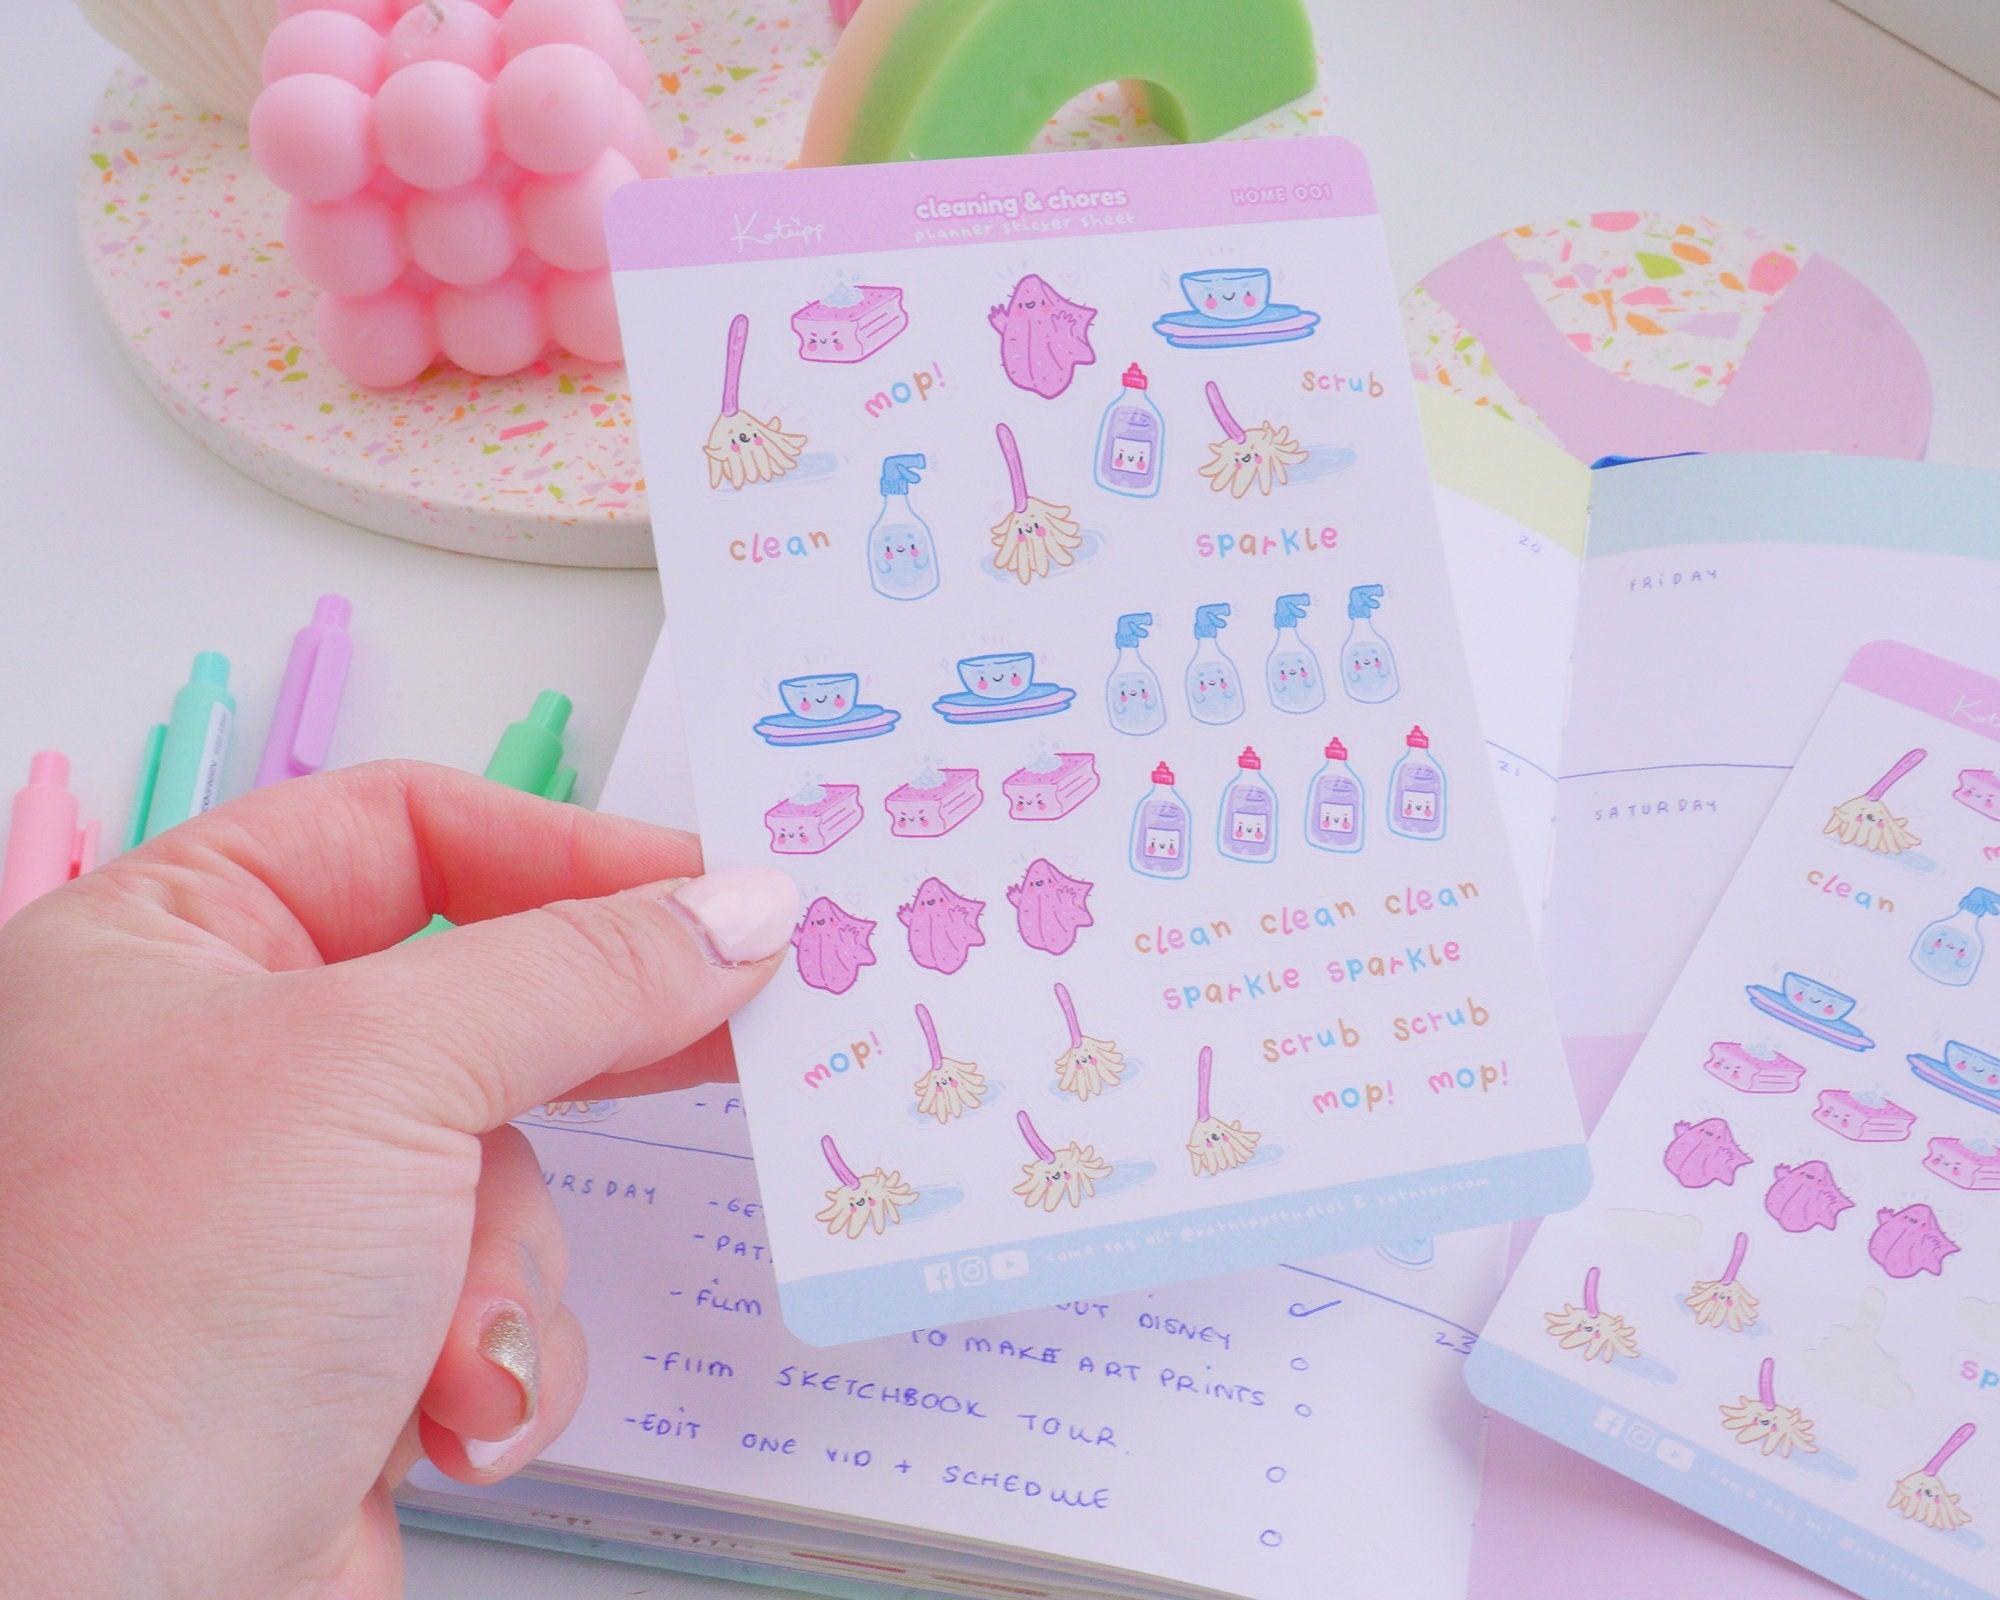 Cleaning House Multi Chores Planner Sticker Sheet ~ HOME001 - Katnipp Illustrations